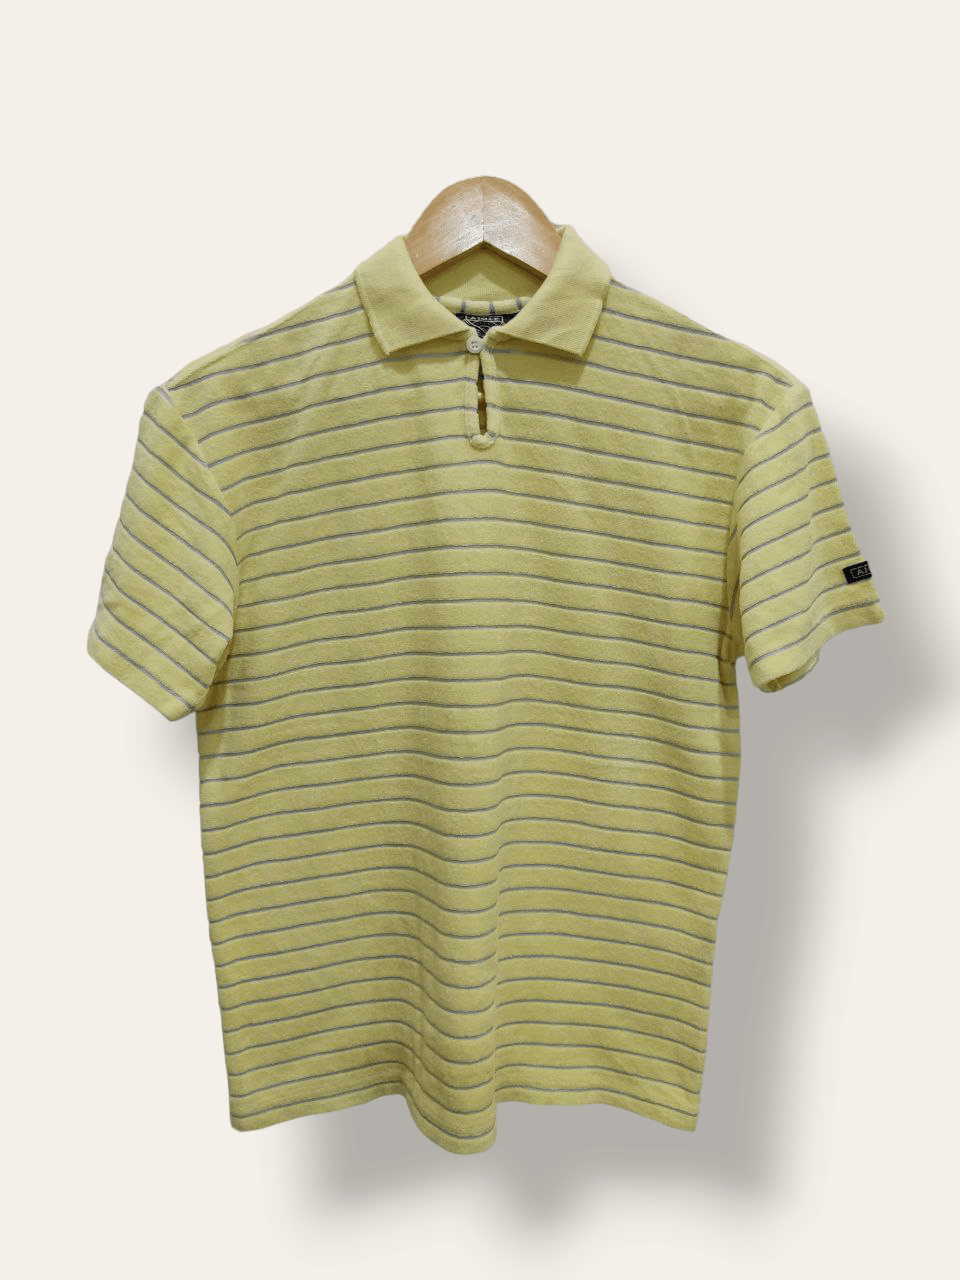 Vintage - Aigle Yellow Striped Made in Japan Polo Tee - 1